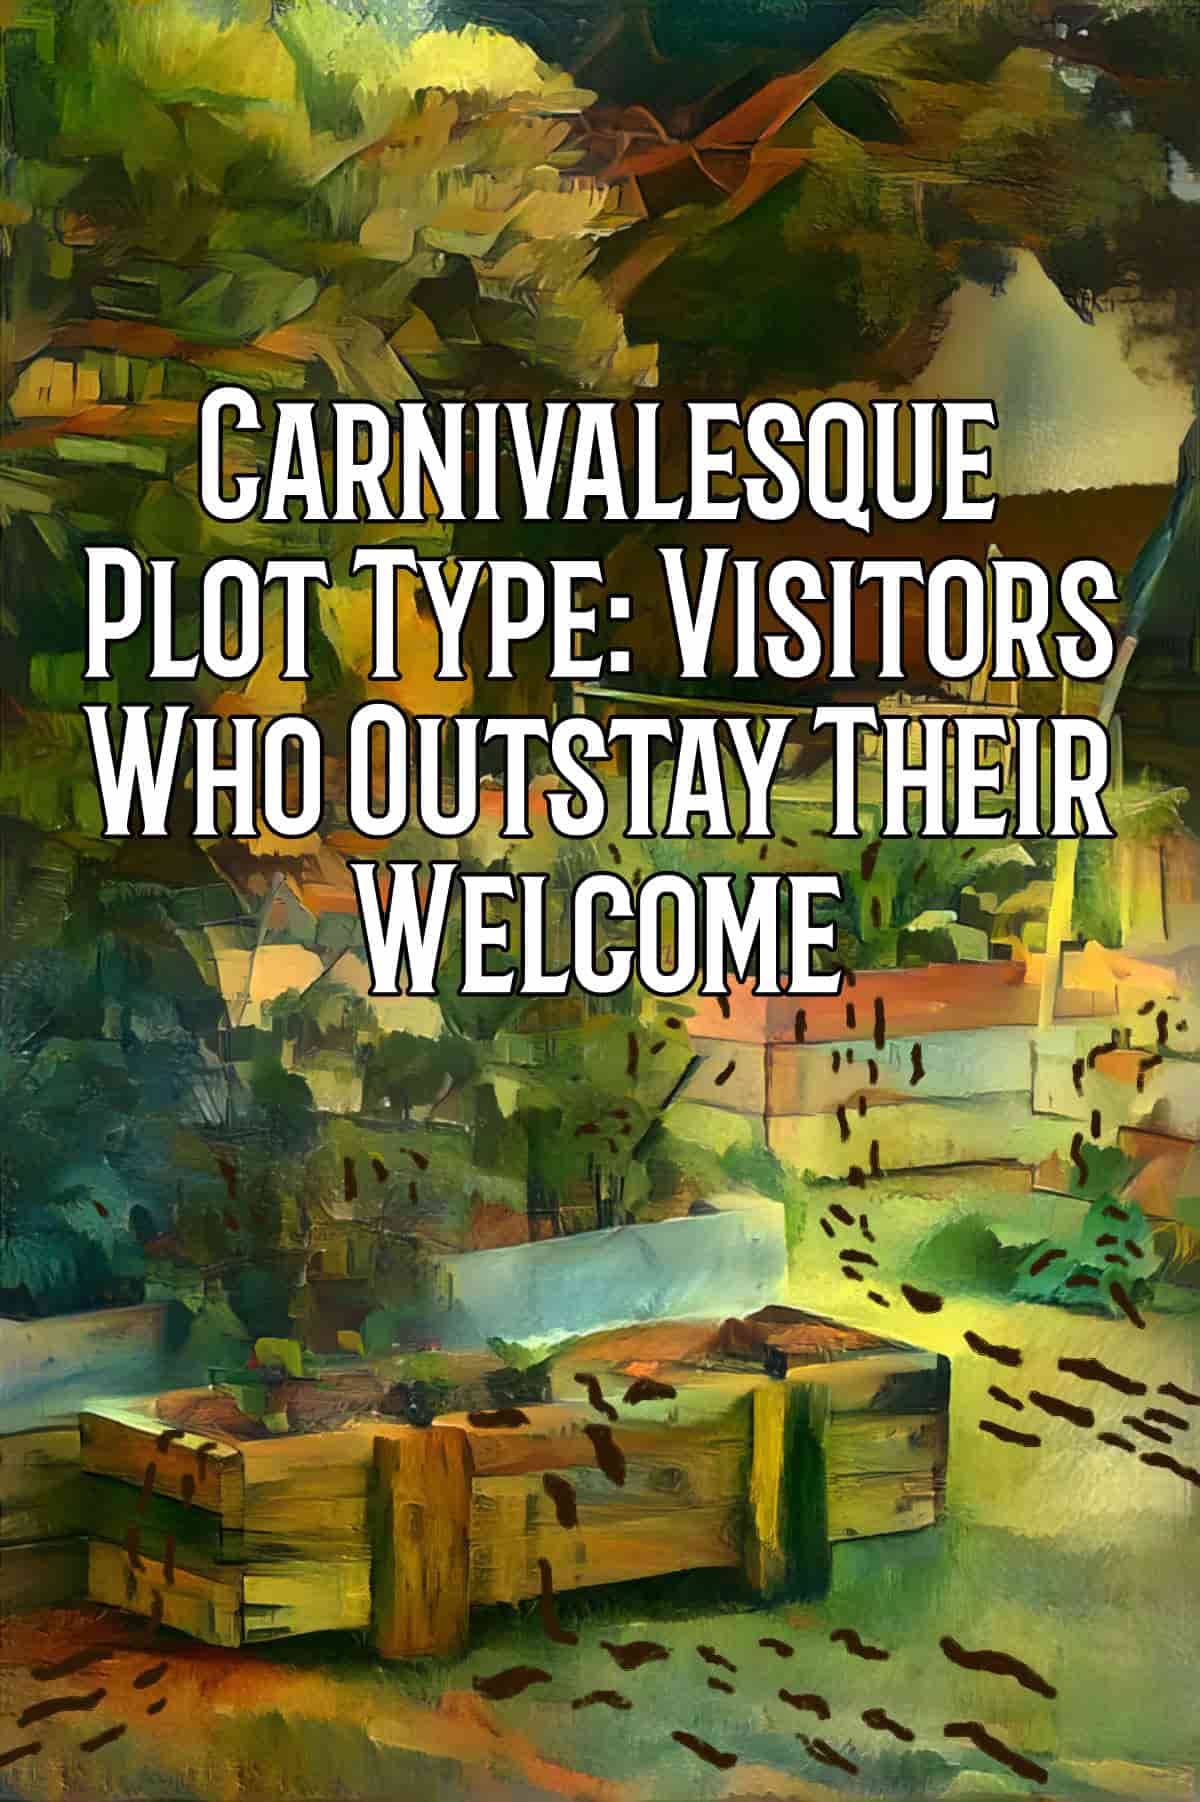 Carnivalesque Plot Type: Visitors Who Outstay Their Welcome